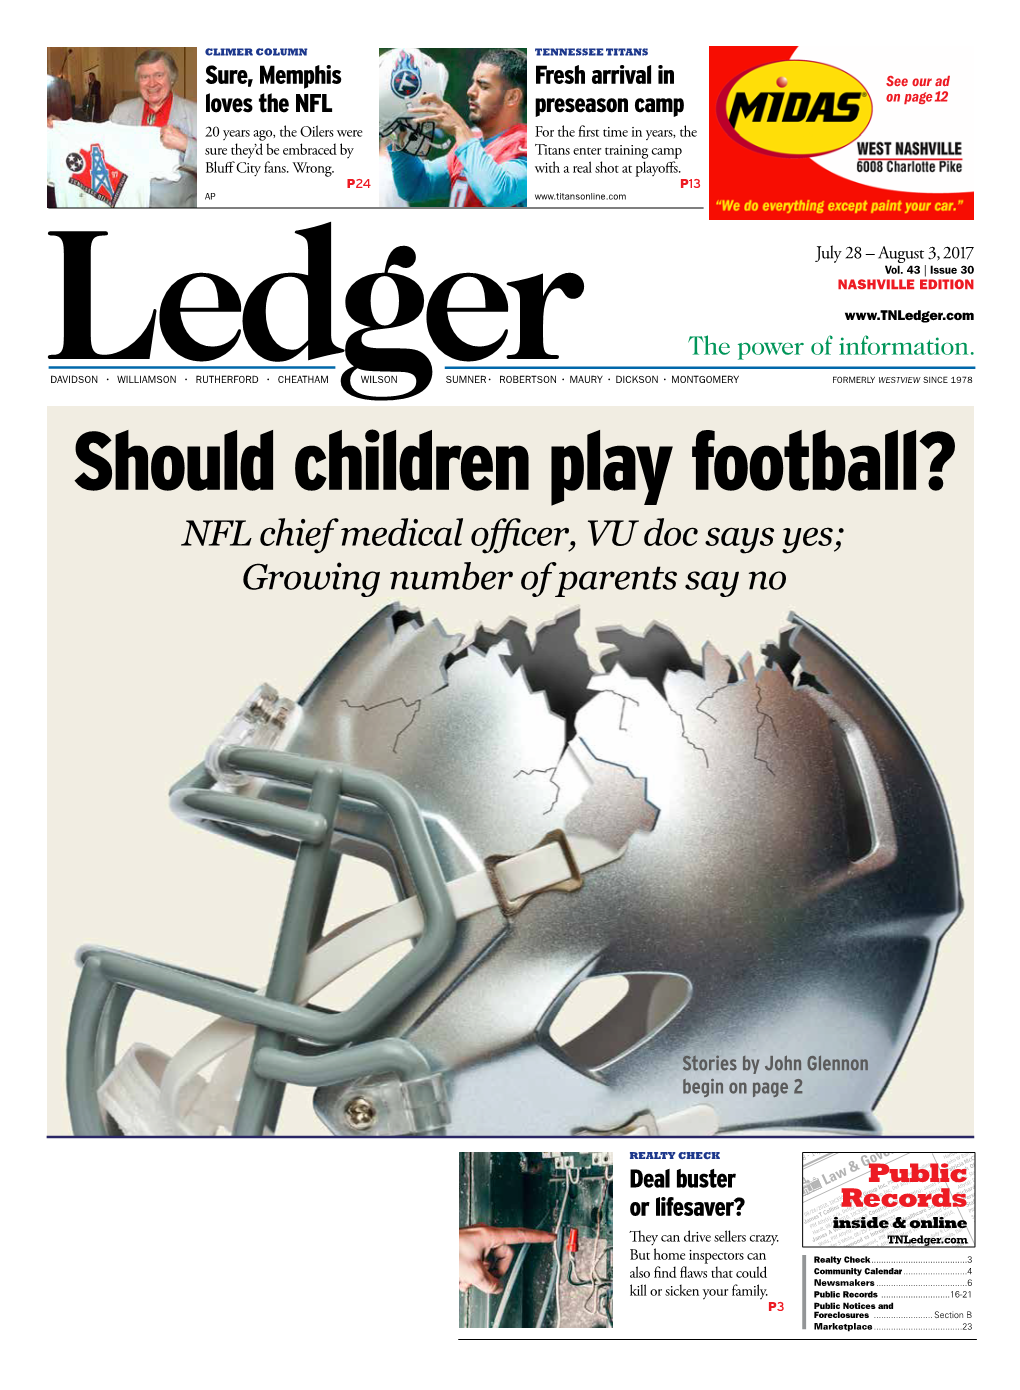 Should Children Play Football? NFL Chief Medical Officer, VU Doc Says Yes; Growing Number of Parents Say No